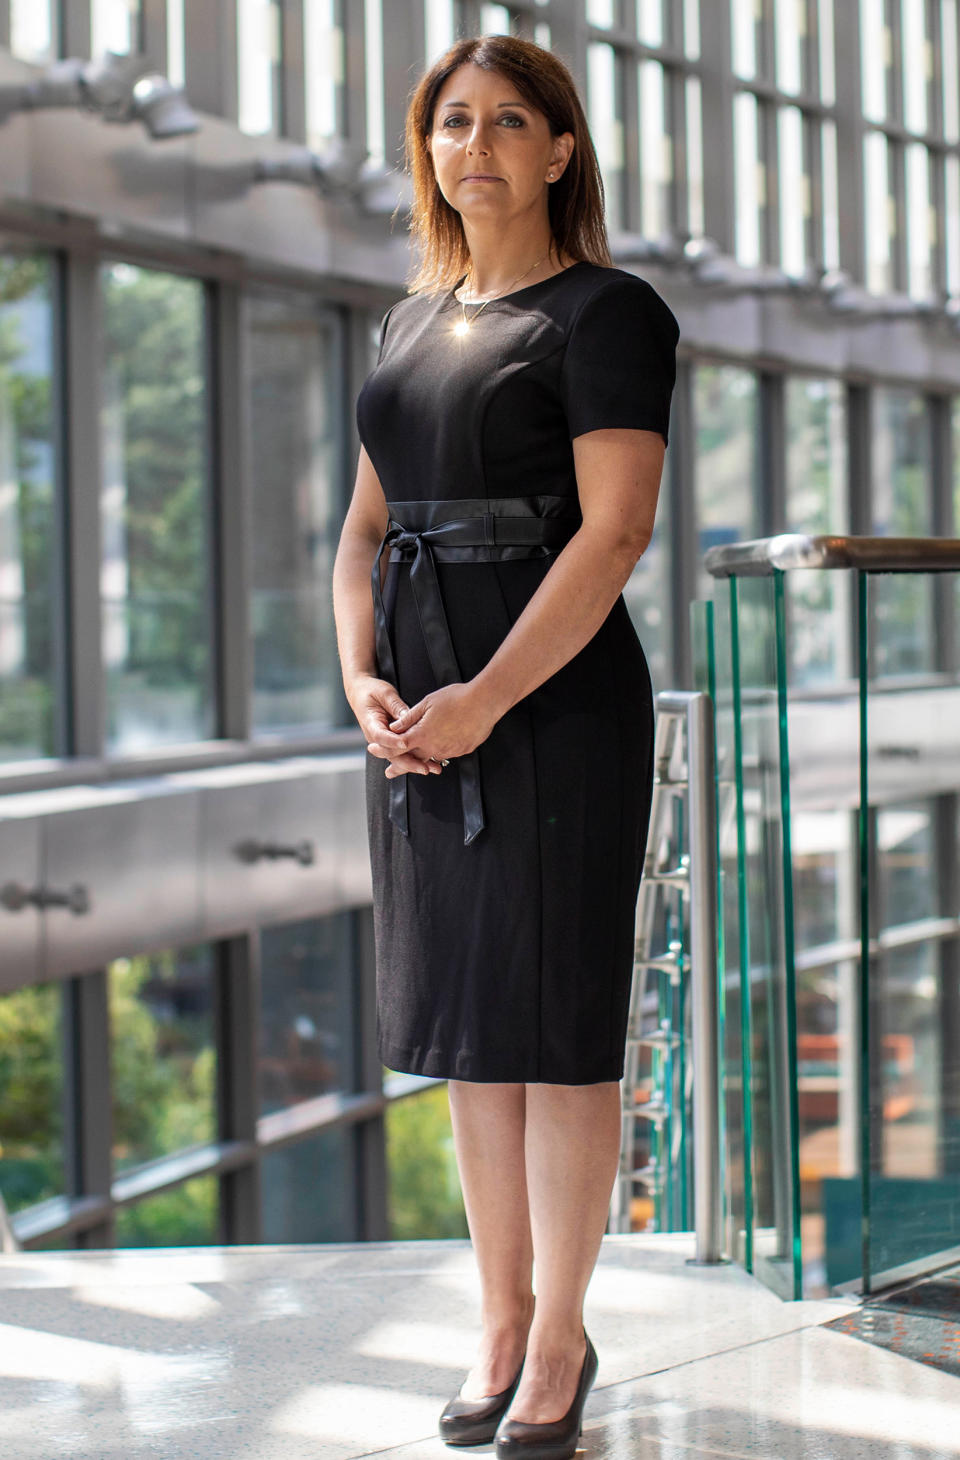 Dr. Mandy Cohen, the 20th Director of the Centers for Disease Control and Prevention, stands for a portrait at the CDC main campus in Atlanta on Thursday, July 20, 2023. (Alyssa Pointer for NBC News)